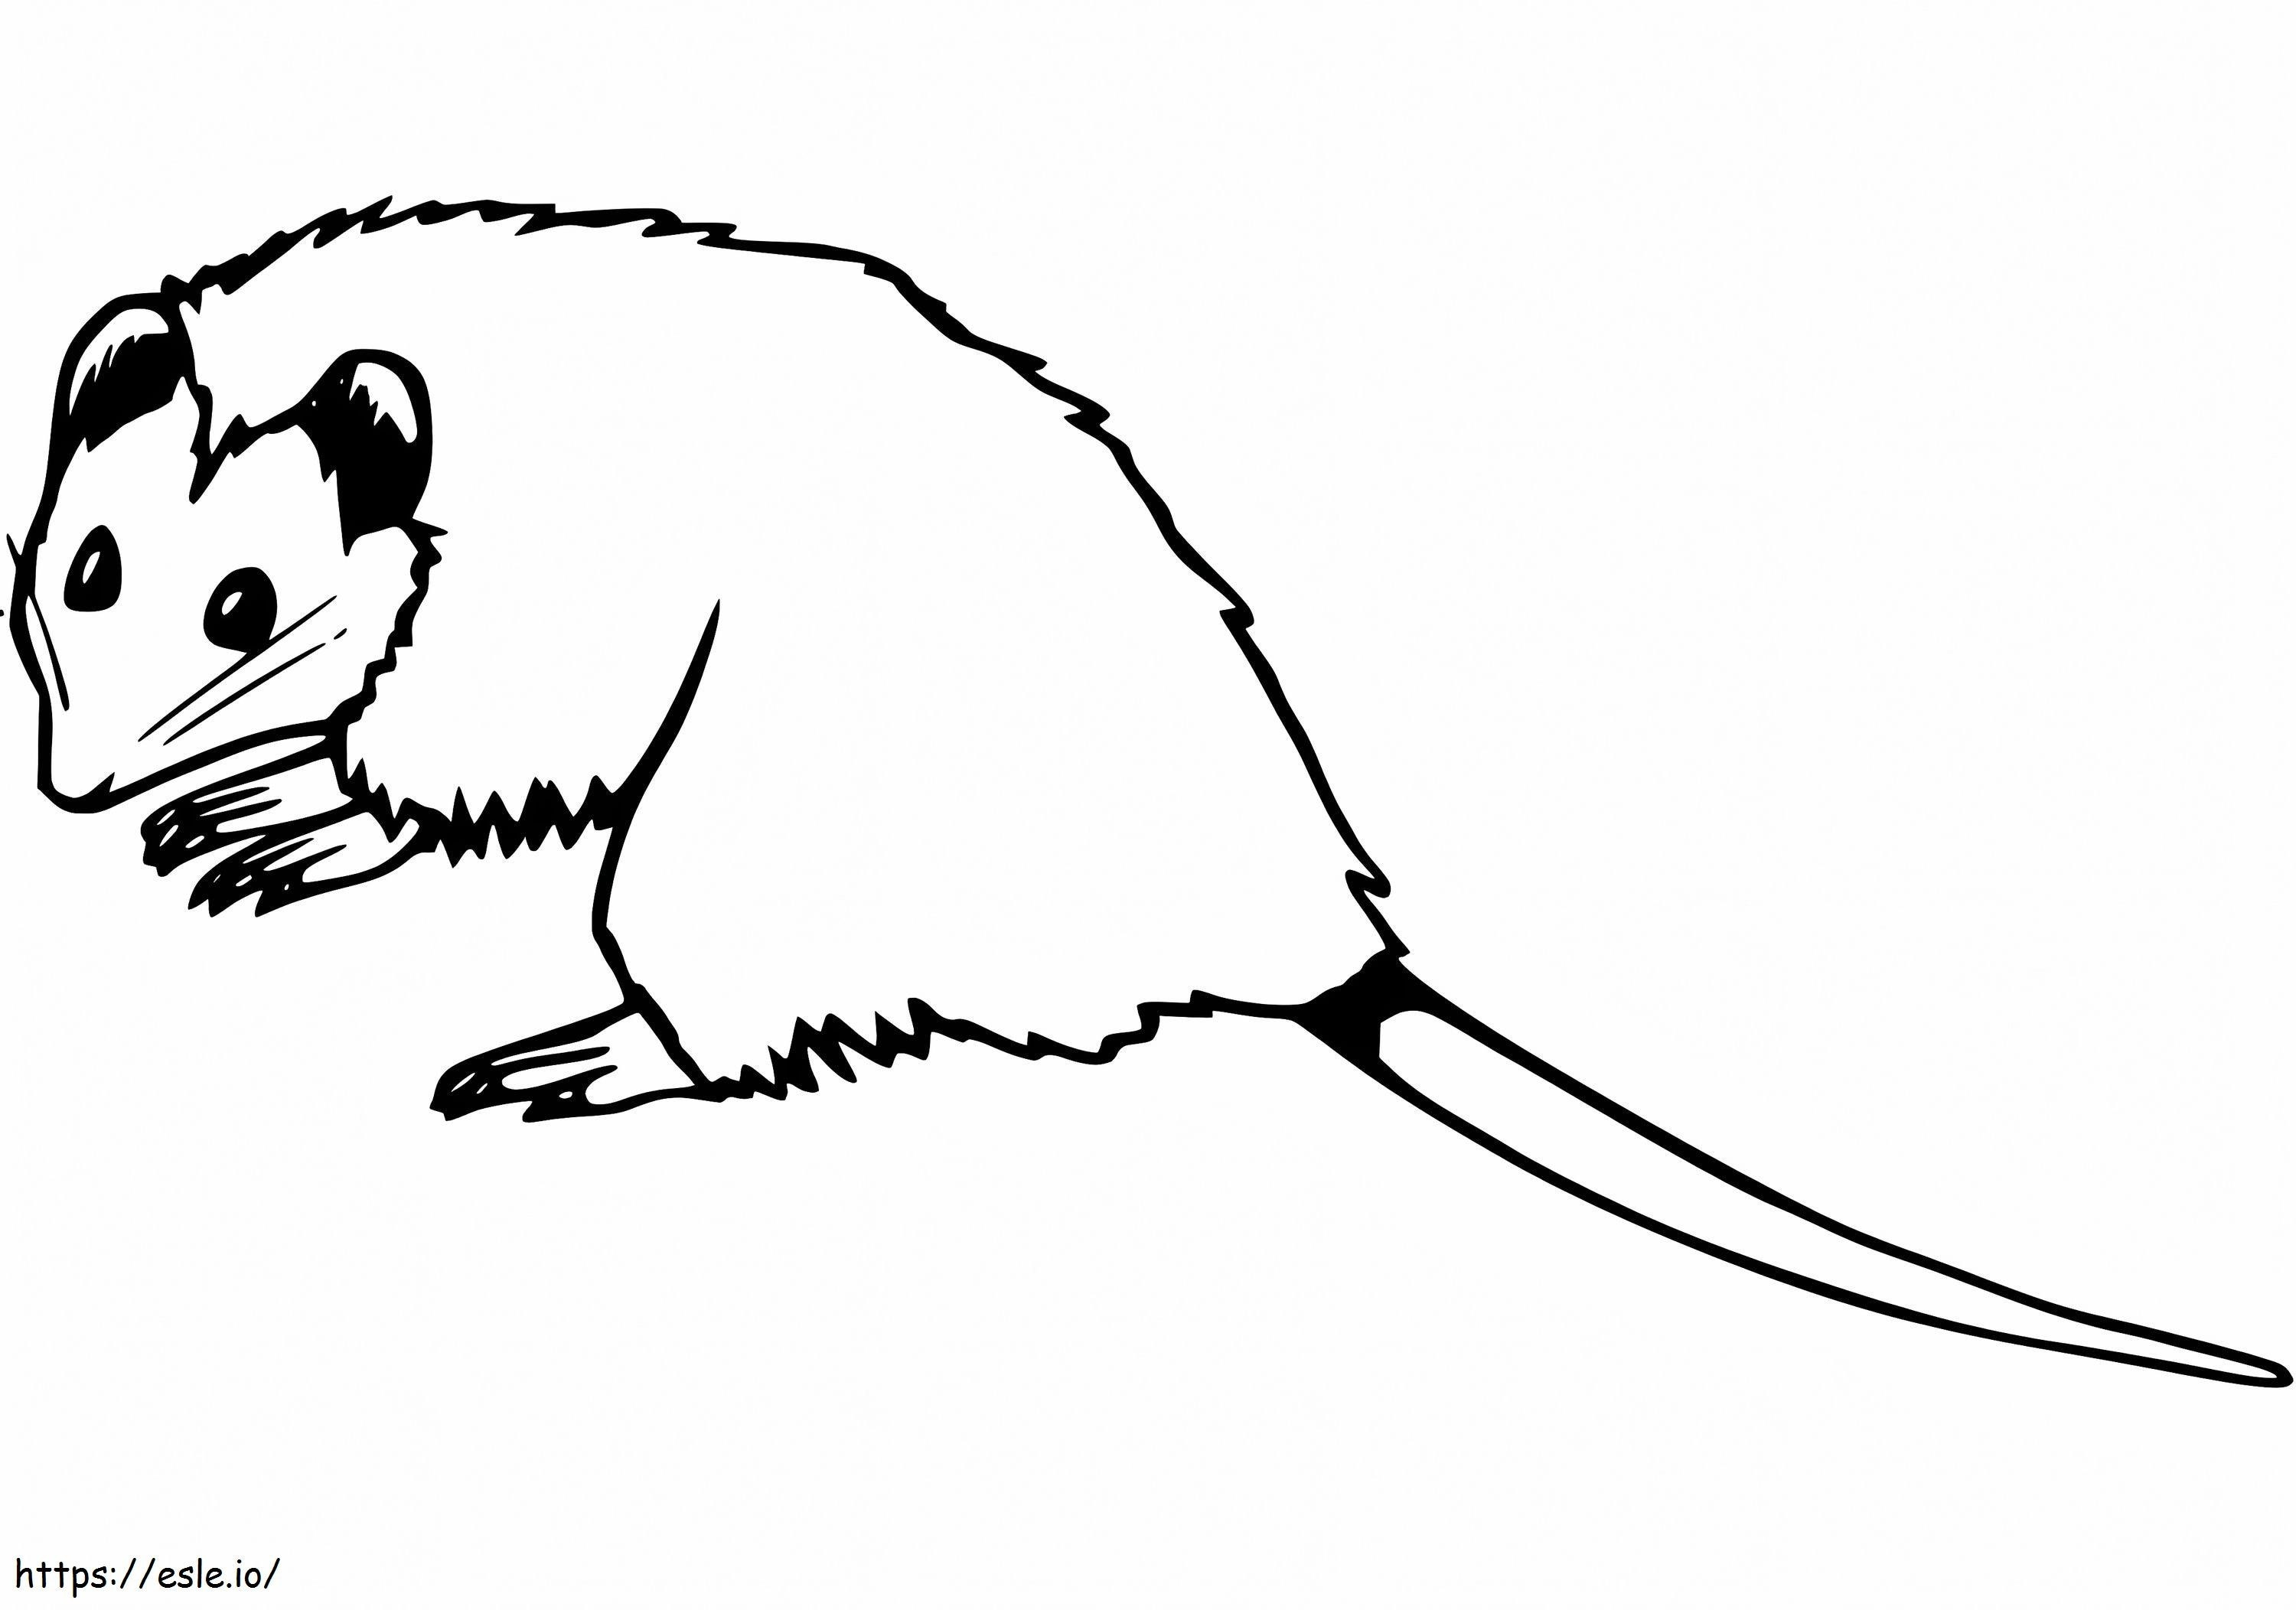 Little Opossum coloring page